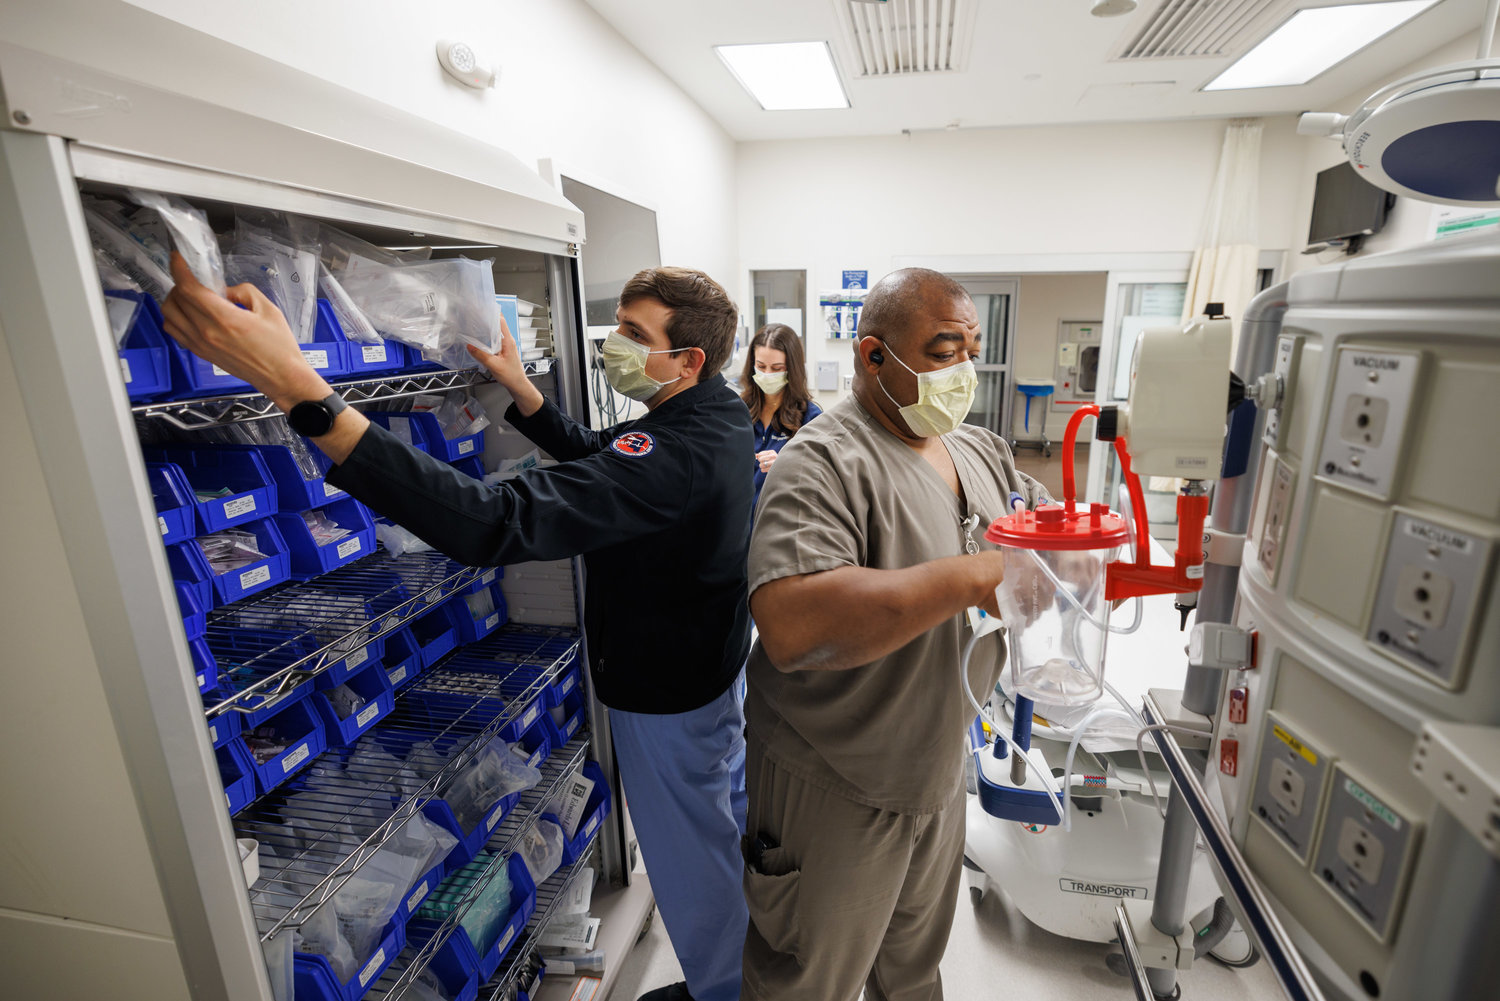 Emergency Medicine Resident Dr. Andrew Garza, left, Pharmacist Stephanie Tesseneer, background, and Respiratory Therapist Charles Patton stock supplies in a Trauma Room in the Adult Emergency Department at the University of Mississippi Medical Center.